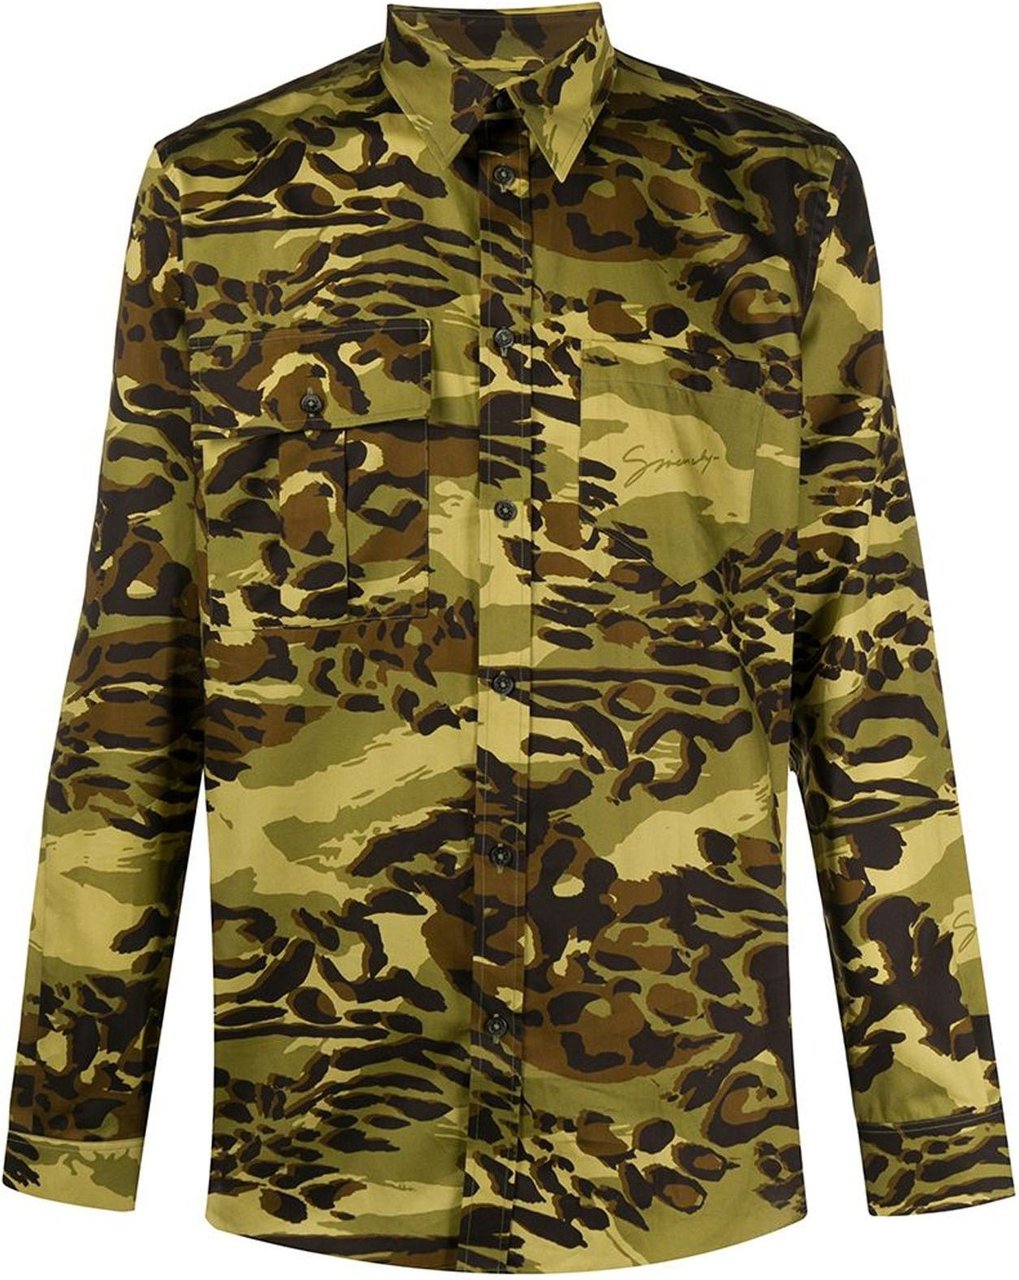 Givenchy Givenchy Camouflage Print Shirt Groen